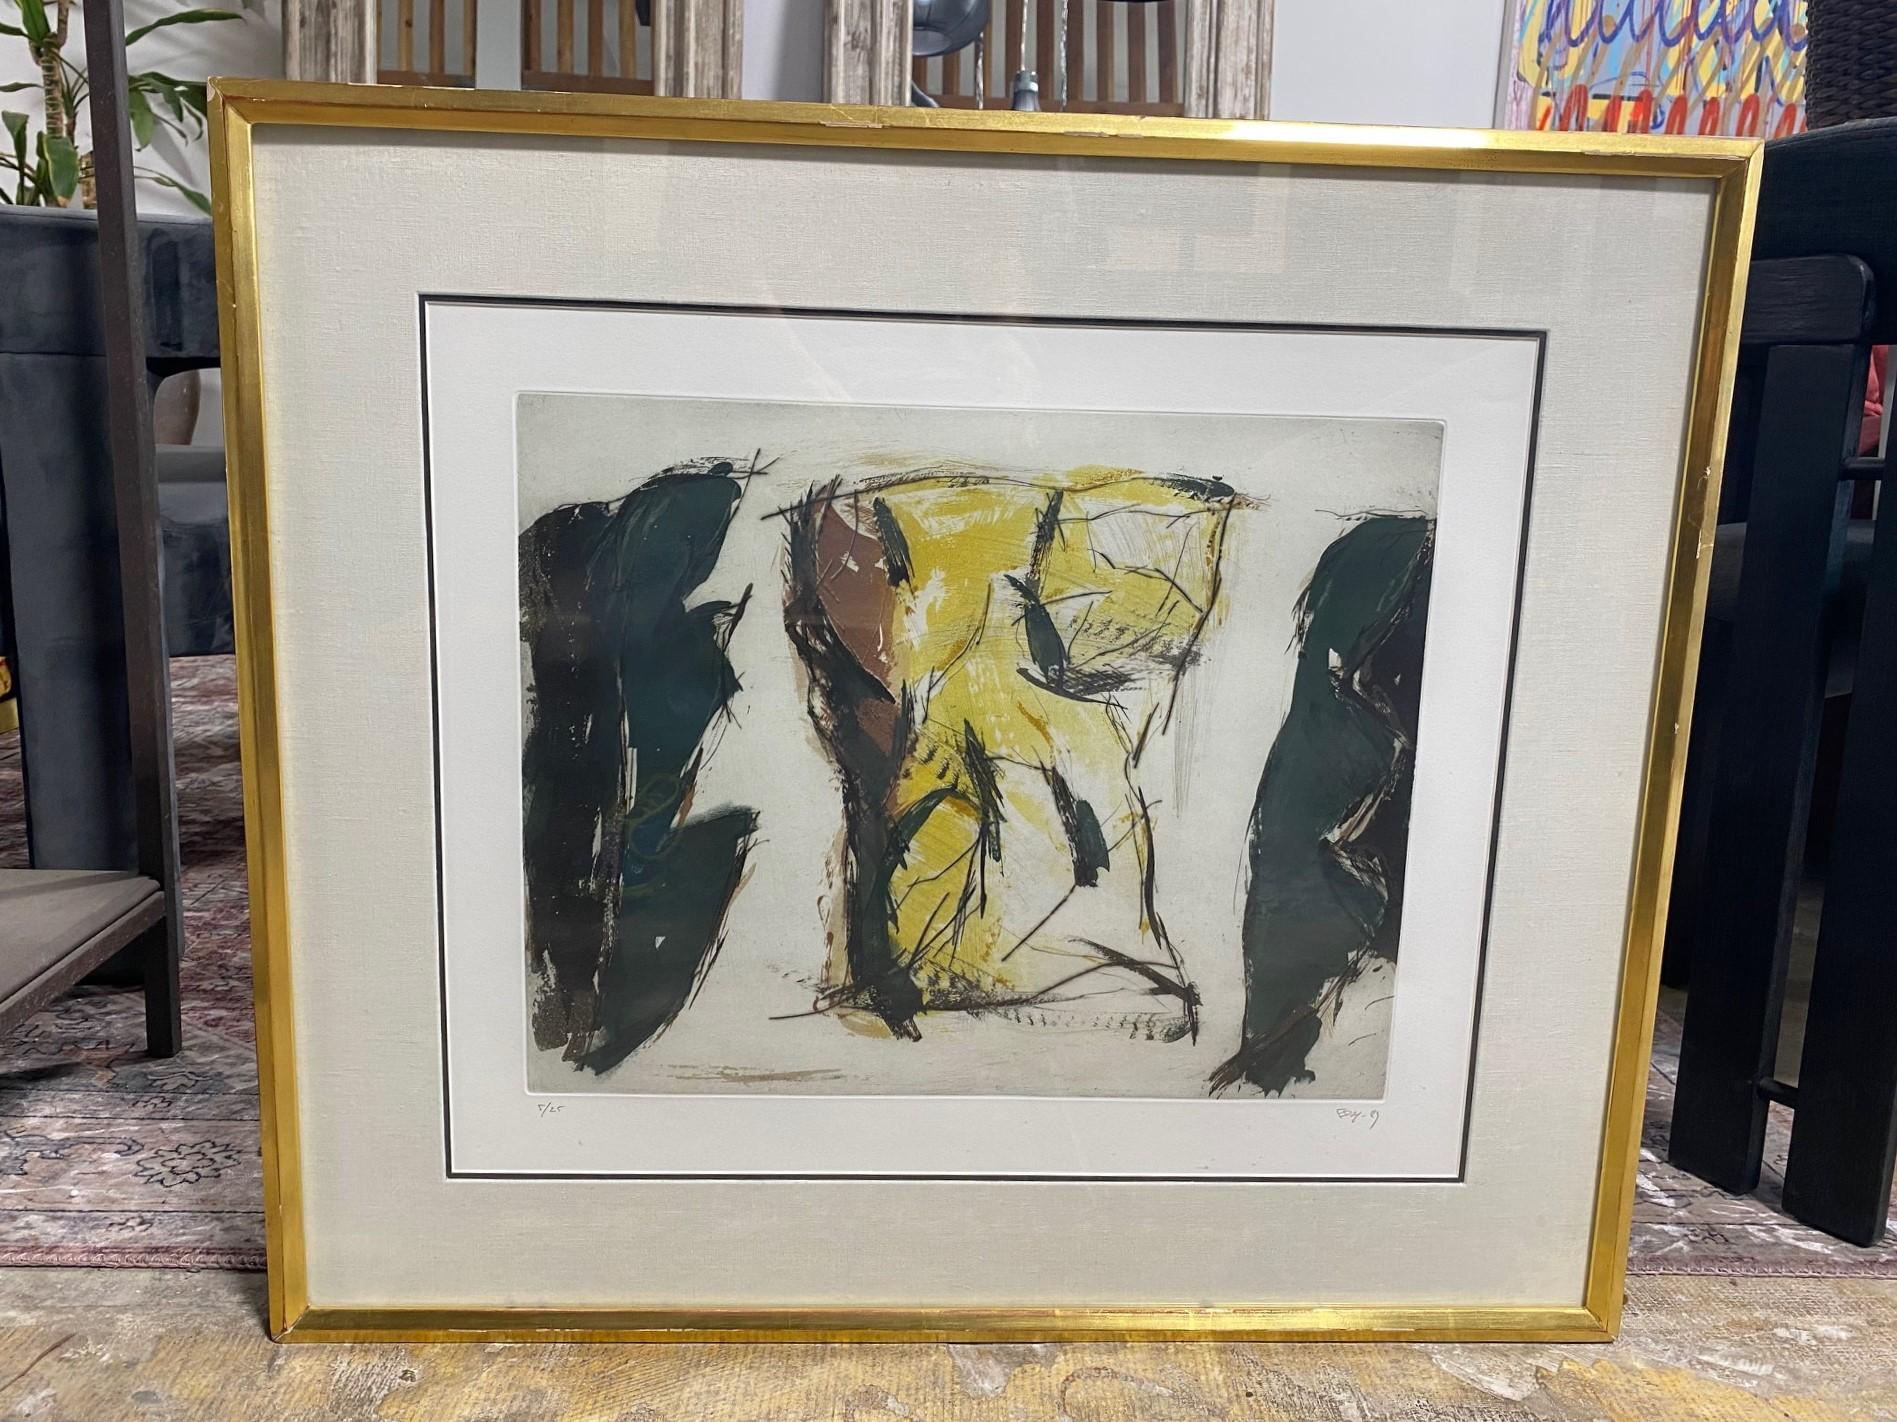 An engaging modern abstract lithographic print that appears to be featuring a human torso/ body - somewhat reminiscent of the abstract works of Henry Moore. 

The work is signed in pencil, dated (1989) and numbered (5/25) by the artist. This piece